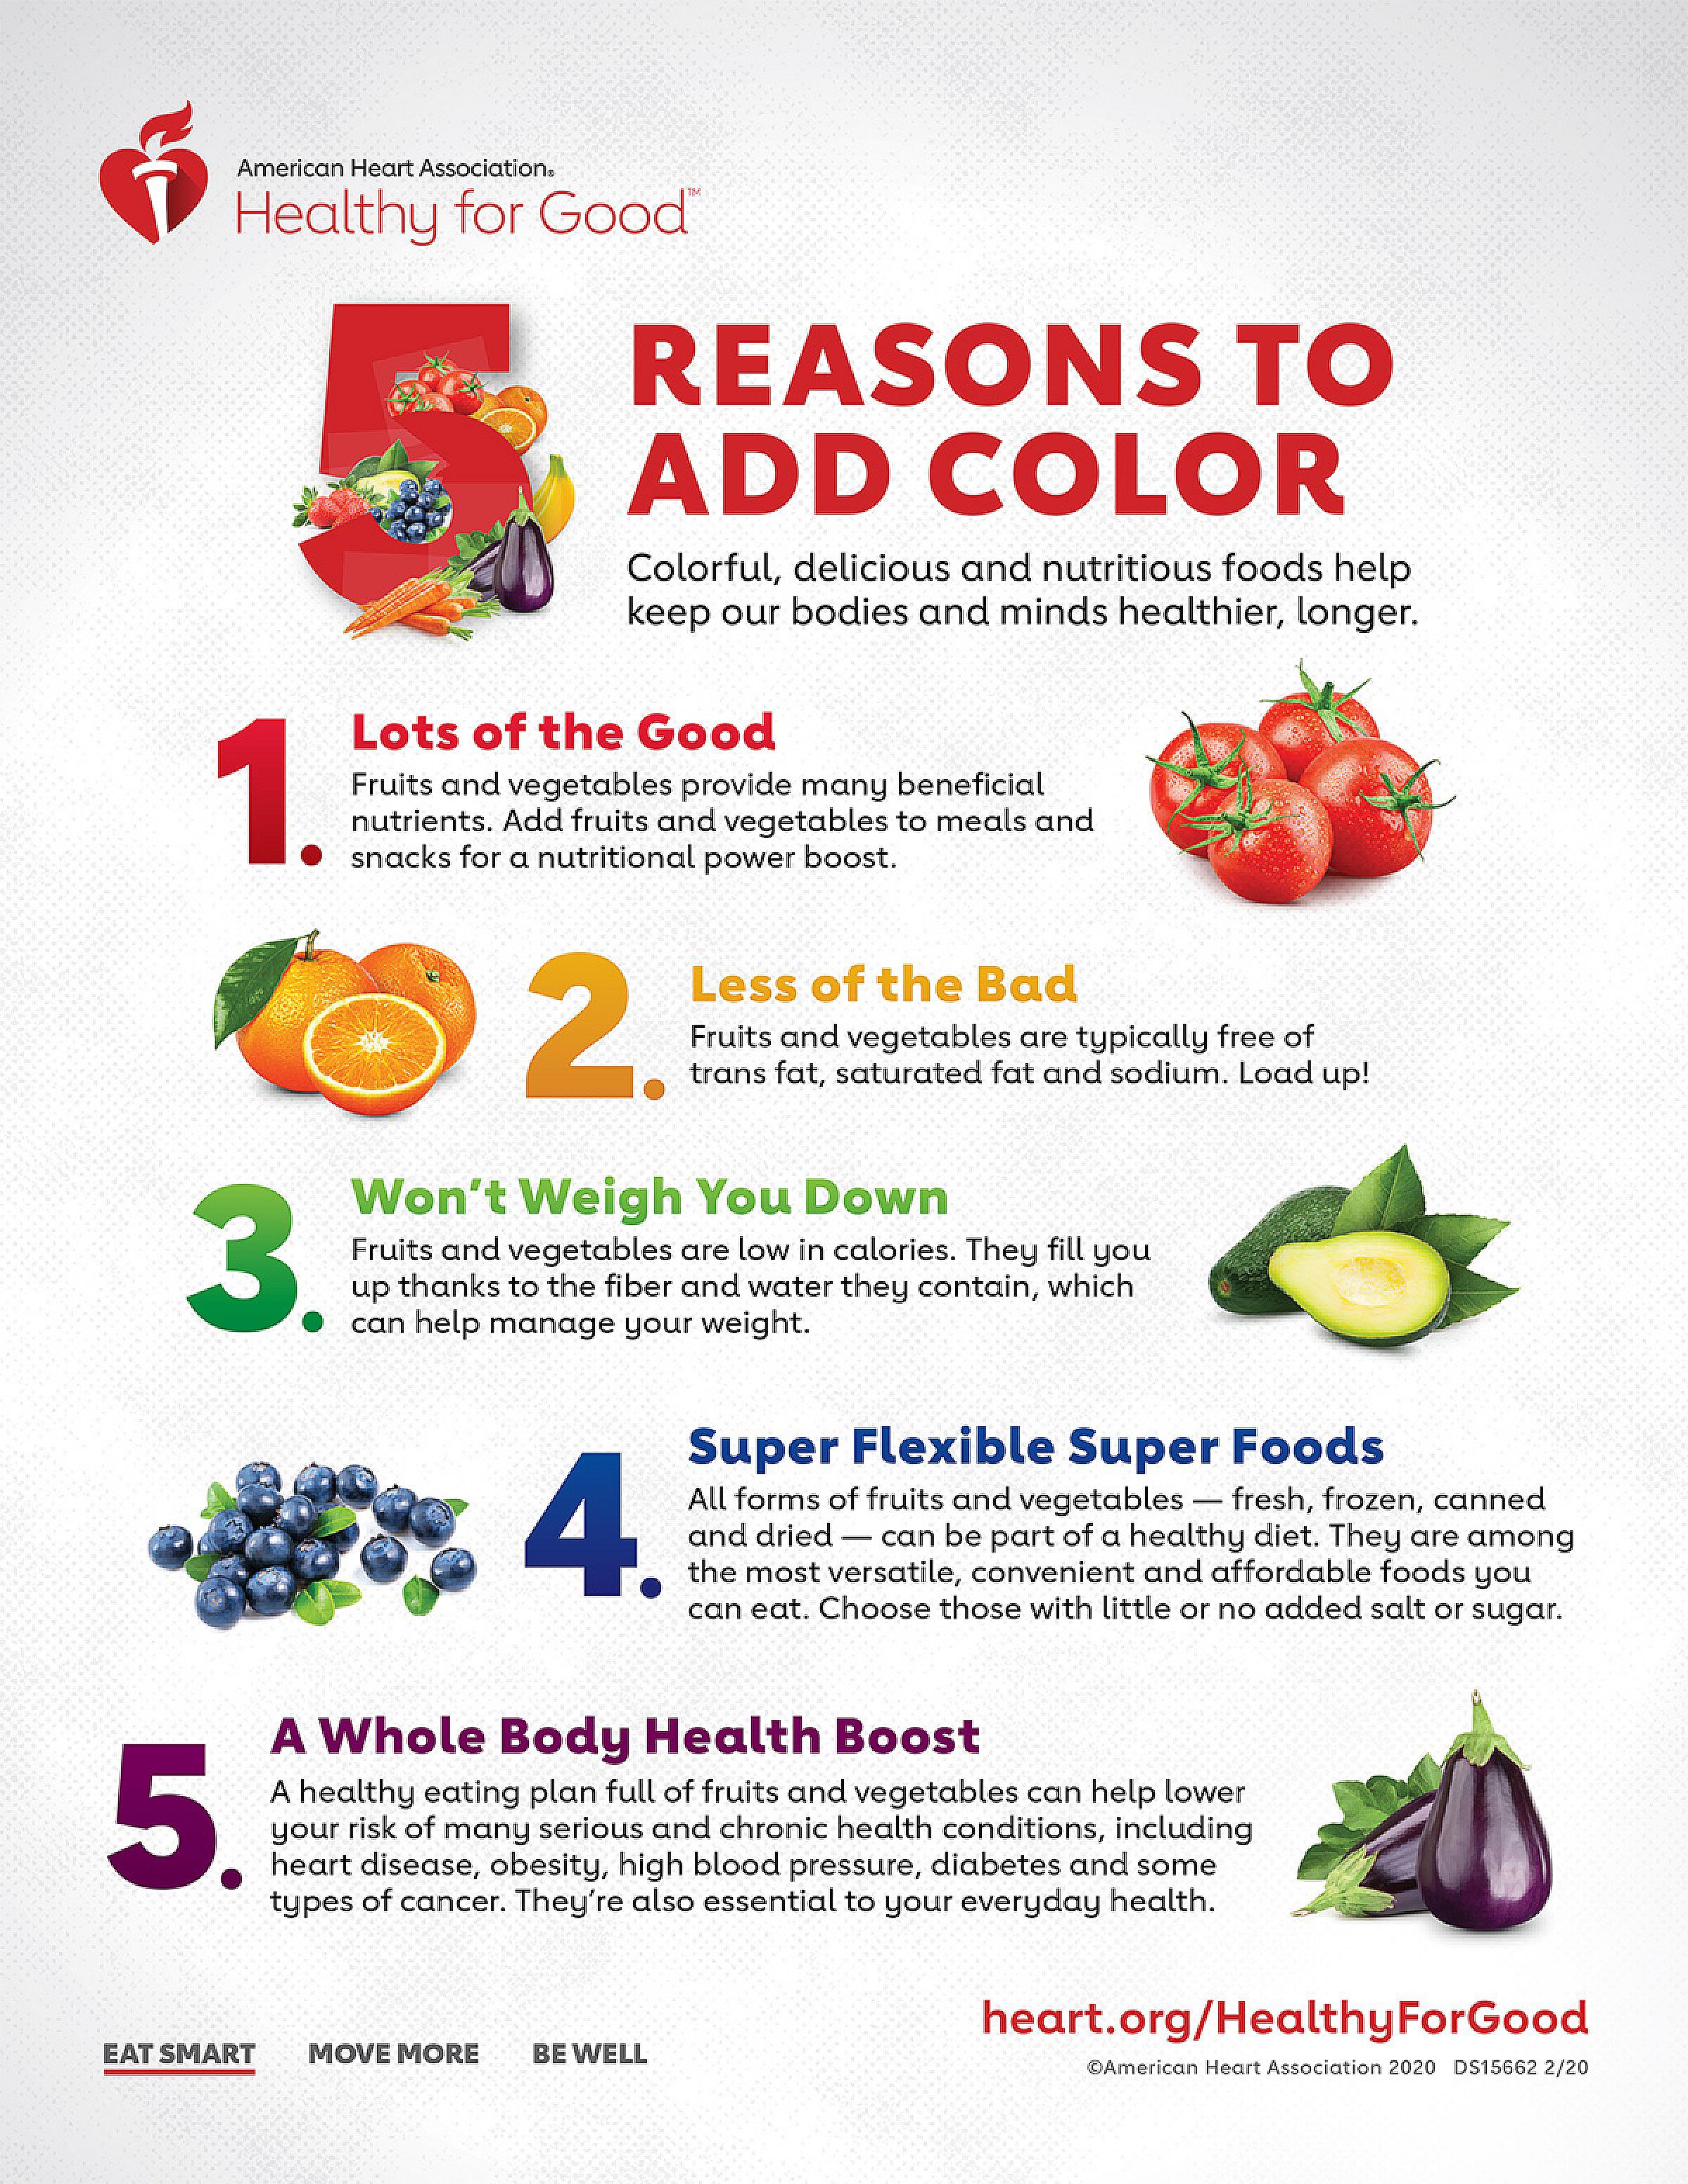 5 reasons to add color infographic